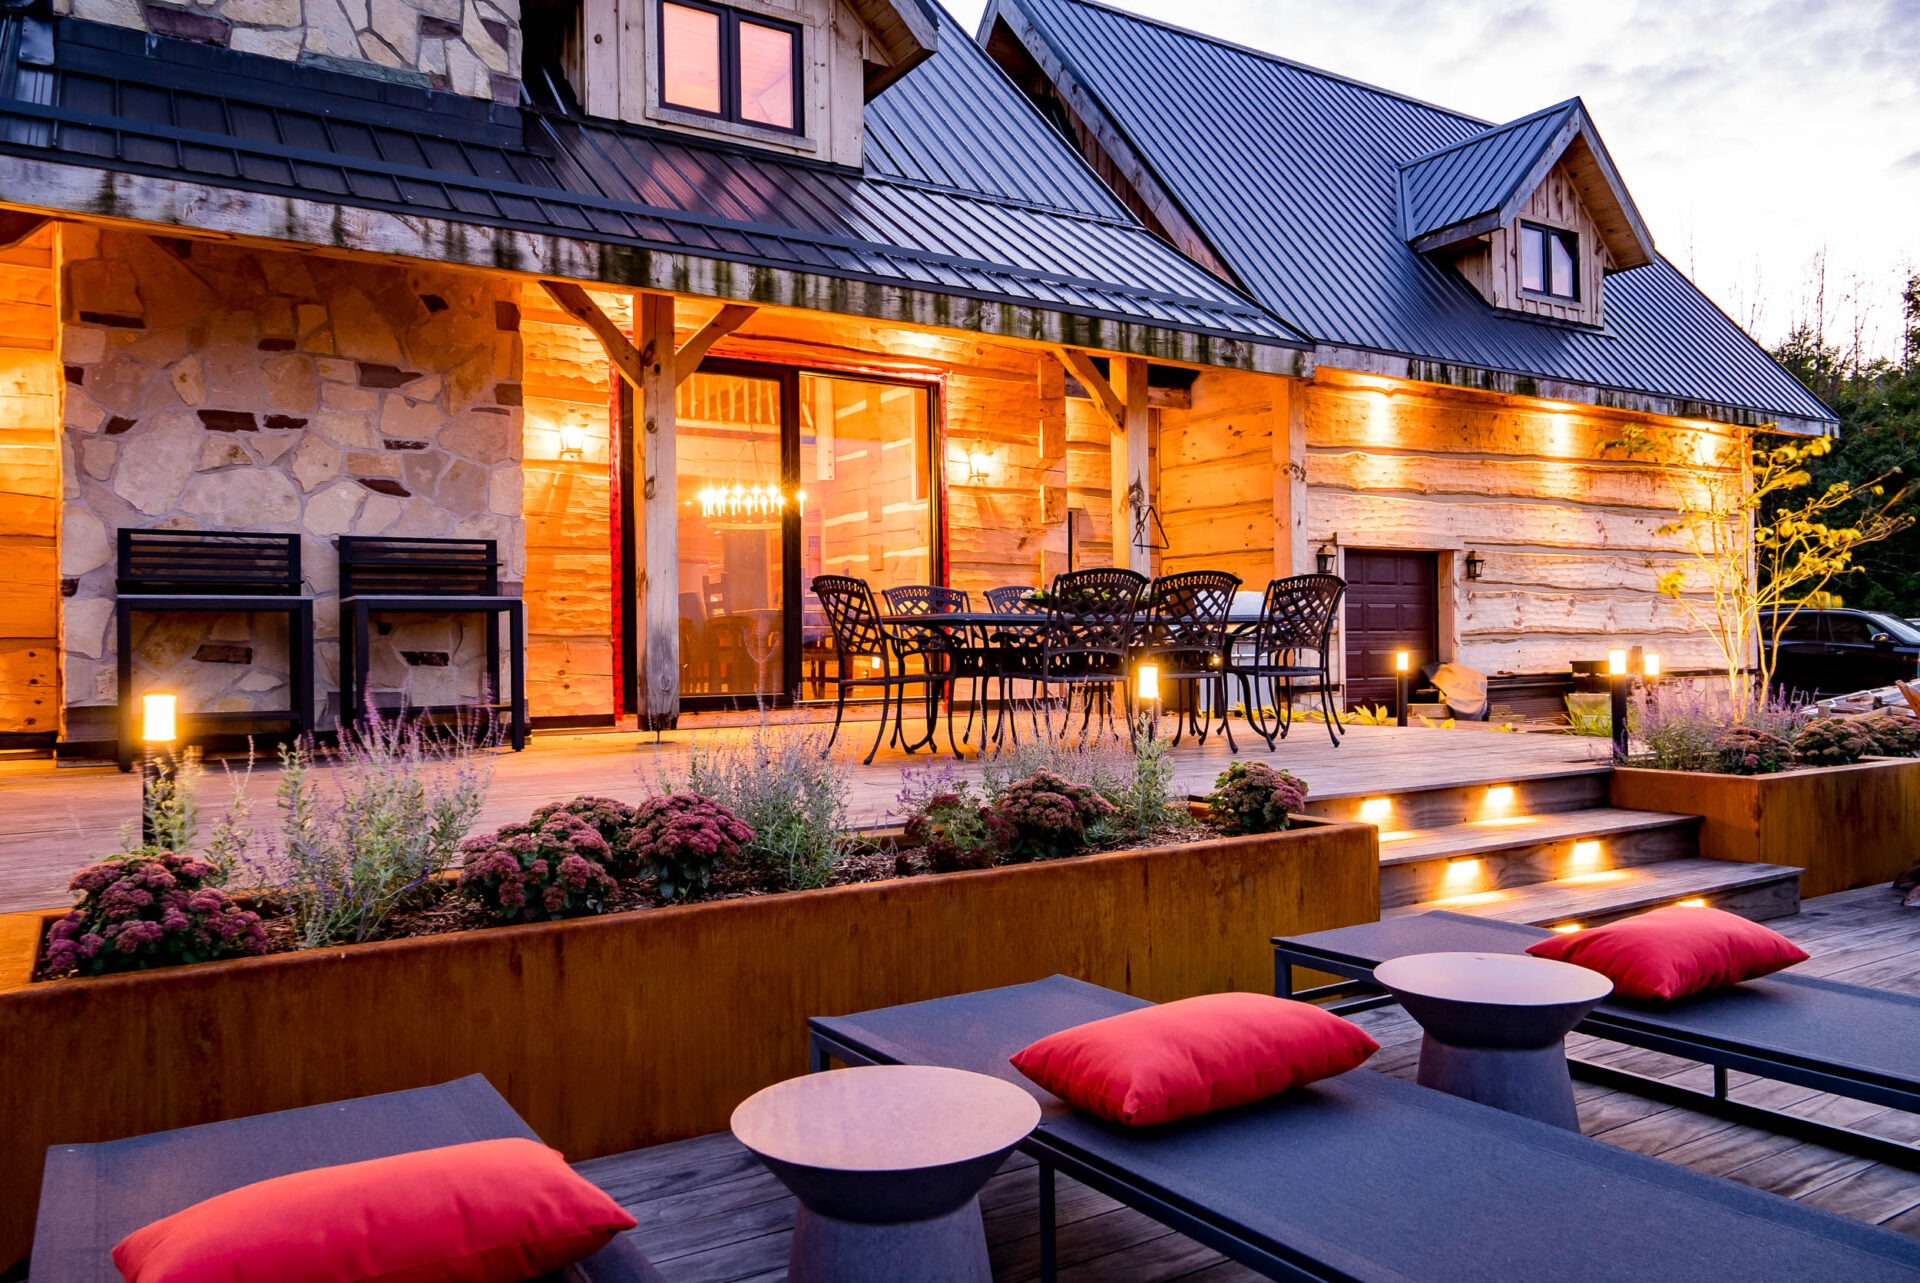 A cozy outdoor patio at dusk with warm lighting, comfortable seating, a wooden log cabin house, and landscaping that includes lush plants.